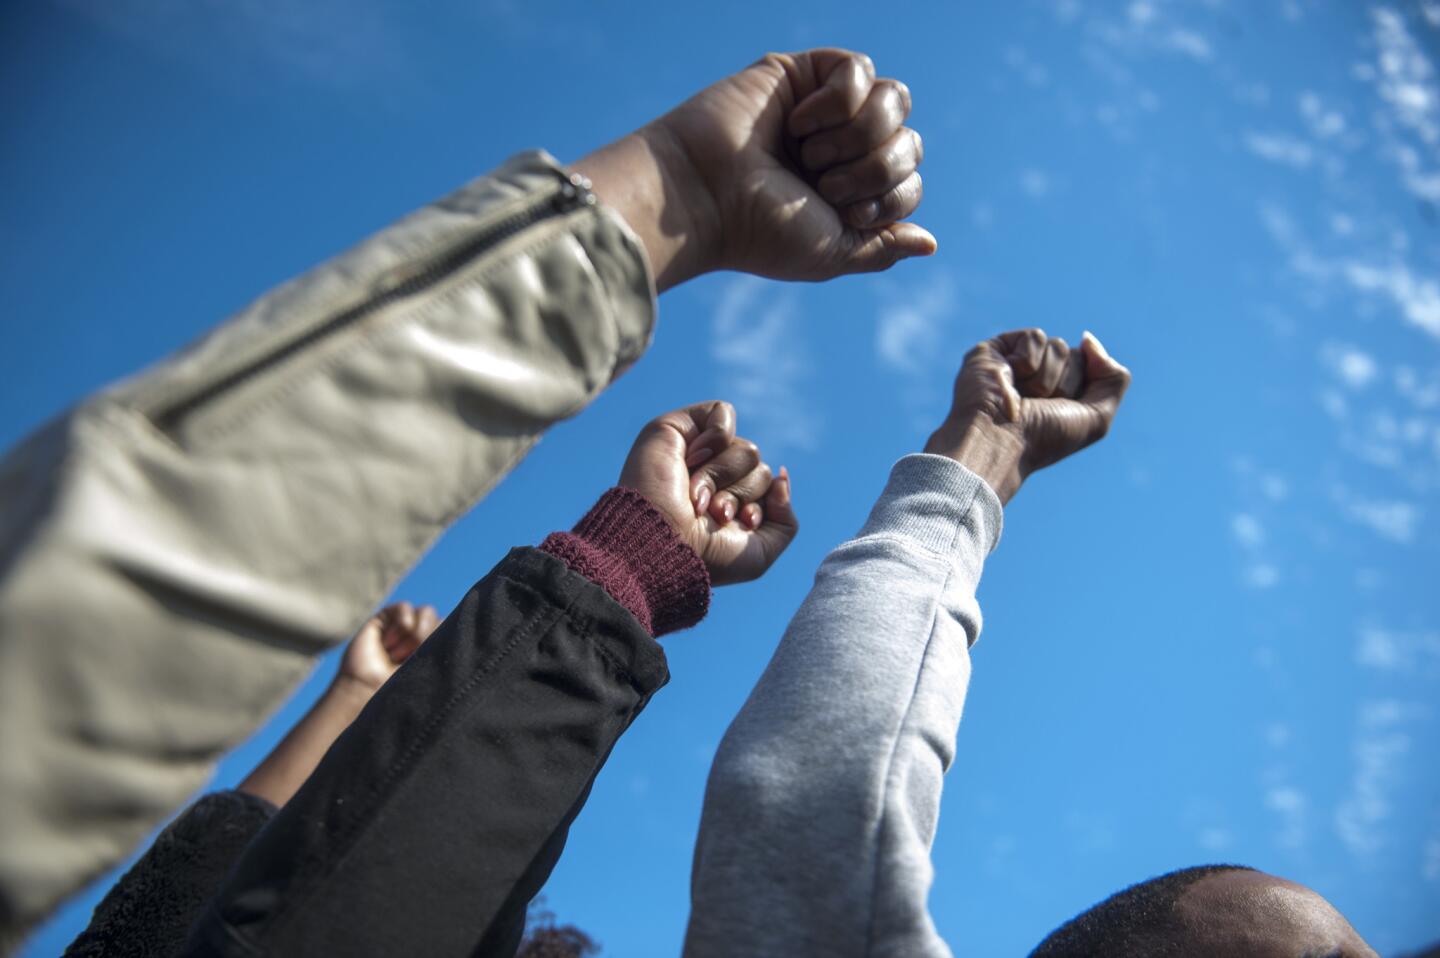 Protesters raise their fists to celebrate University of Missouri System President Tim Wolfe's resignation during a Concerned Students 1950 rally on Nov. 9, 2015, in Columbia, Mo.